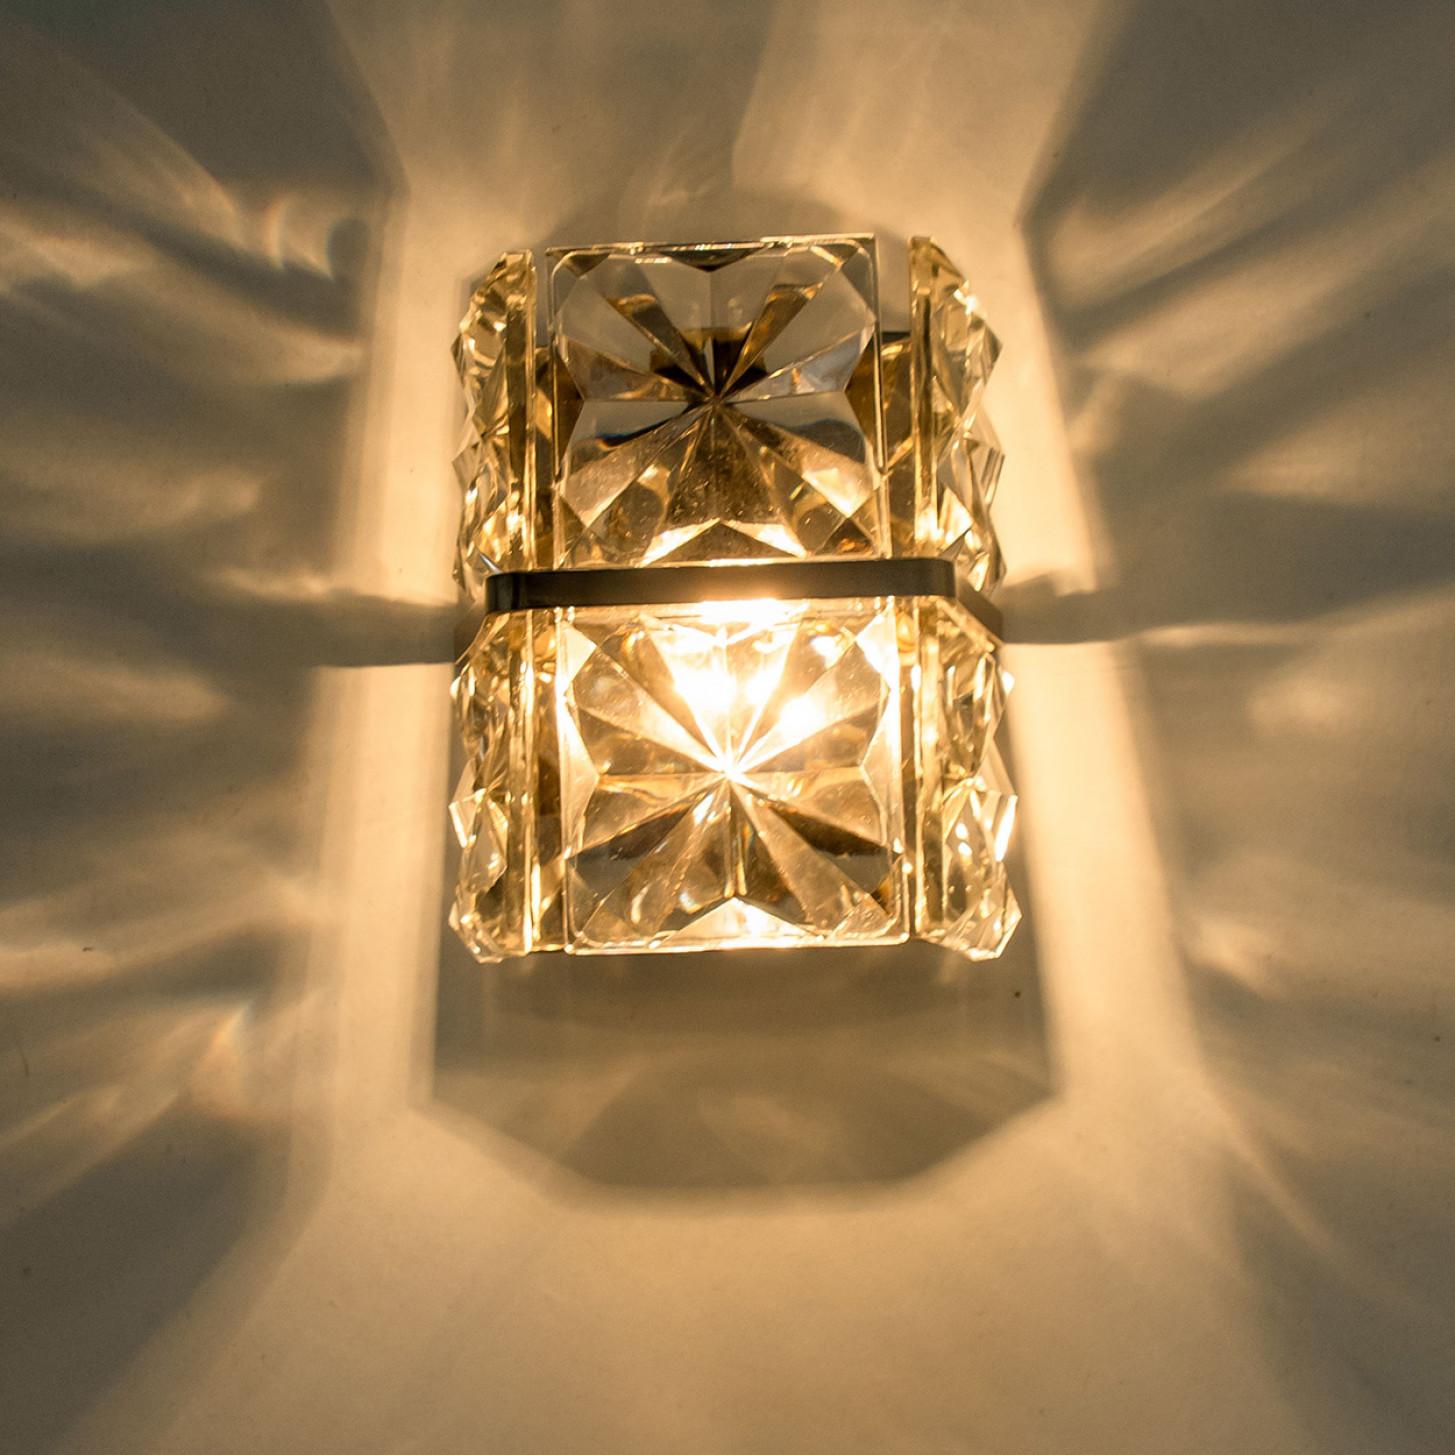 1 of the 2 Square Crystal and Silver Chrome Sconces by Kinkeldey, Germany, 1970 In Excellent Condition For Sale In Rijssen, NL